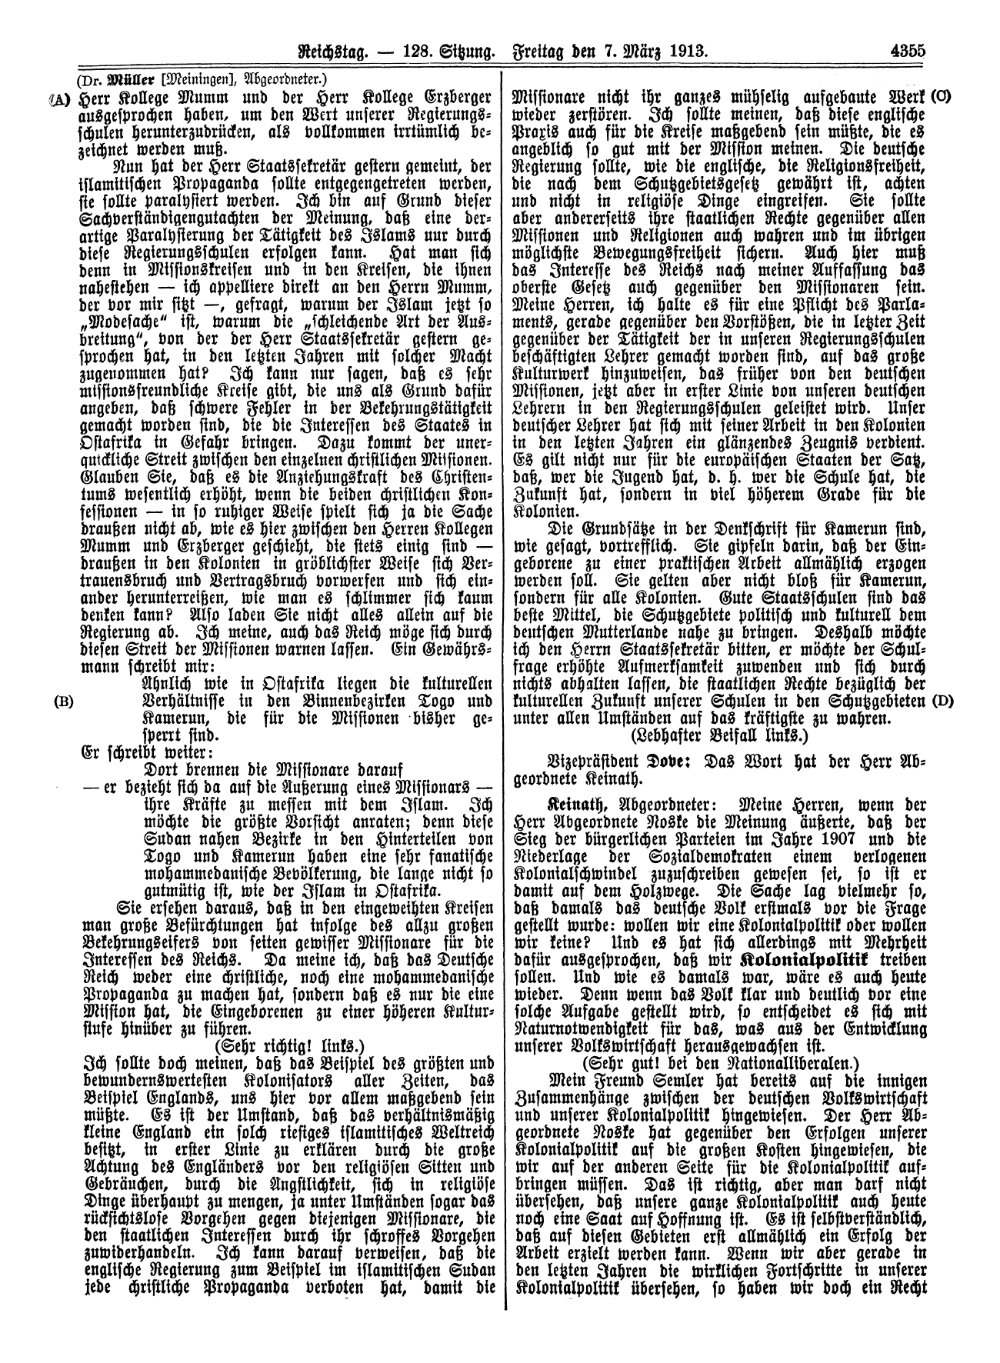 Scan of page 4355